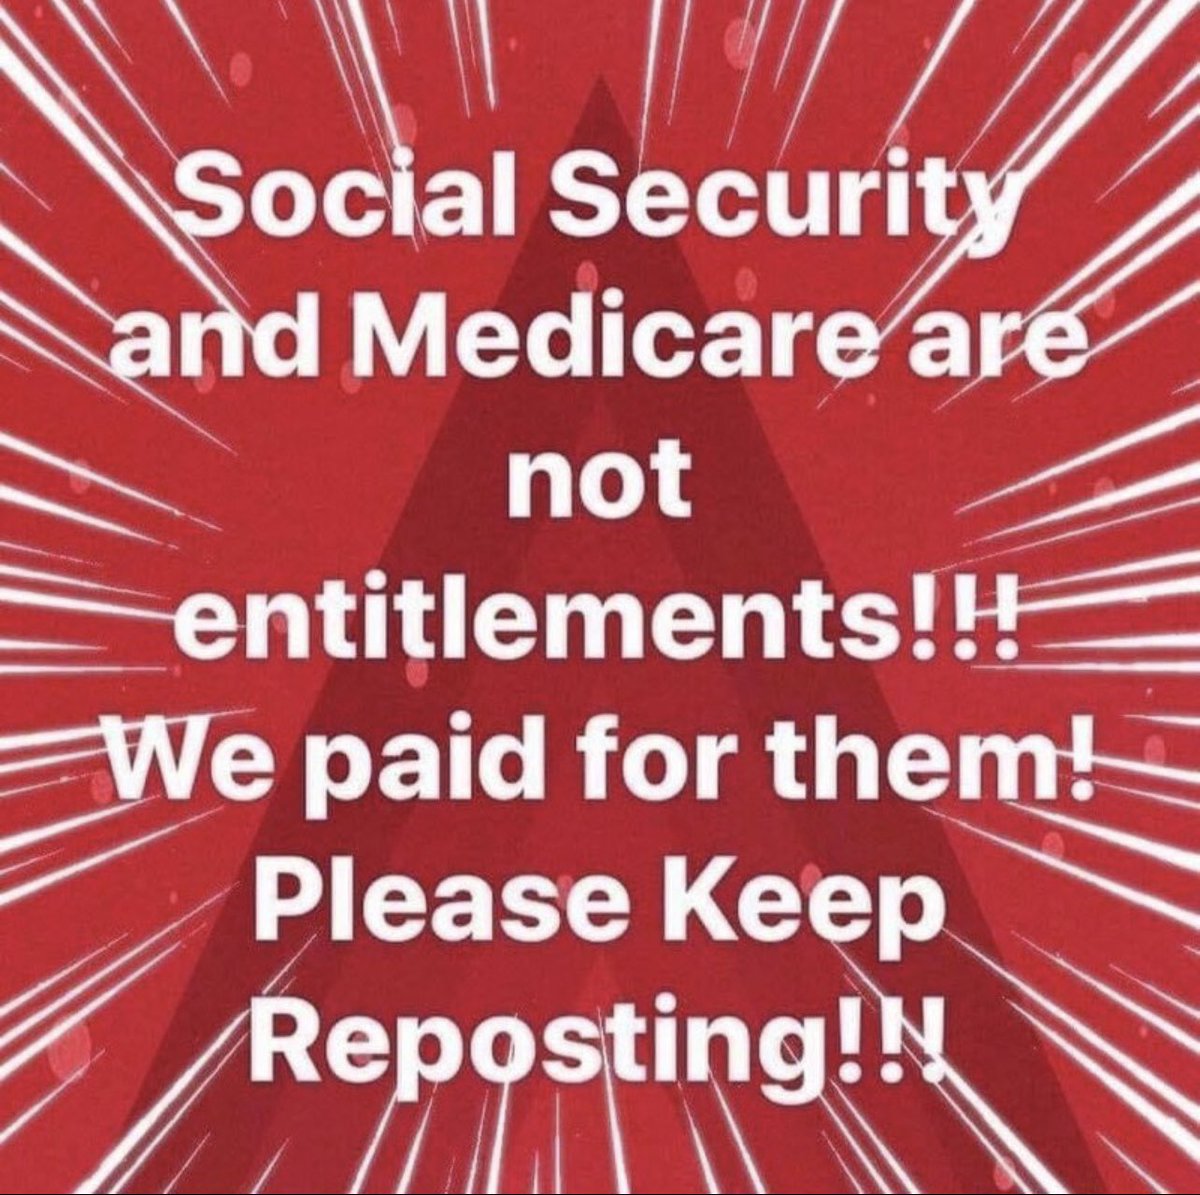 Stop stealing our social security. It’s our money.